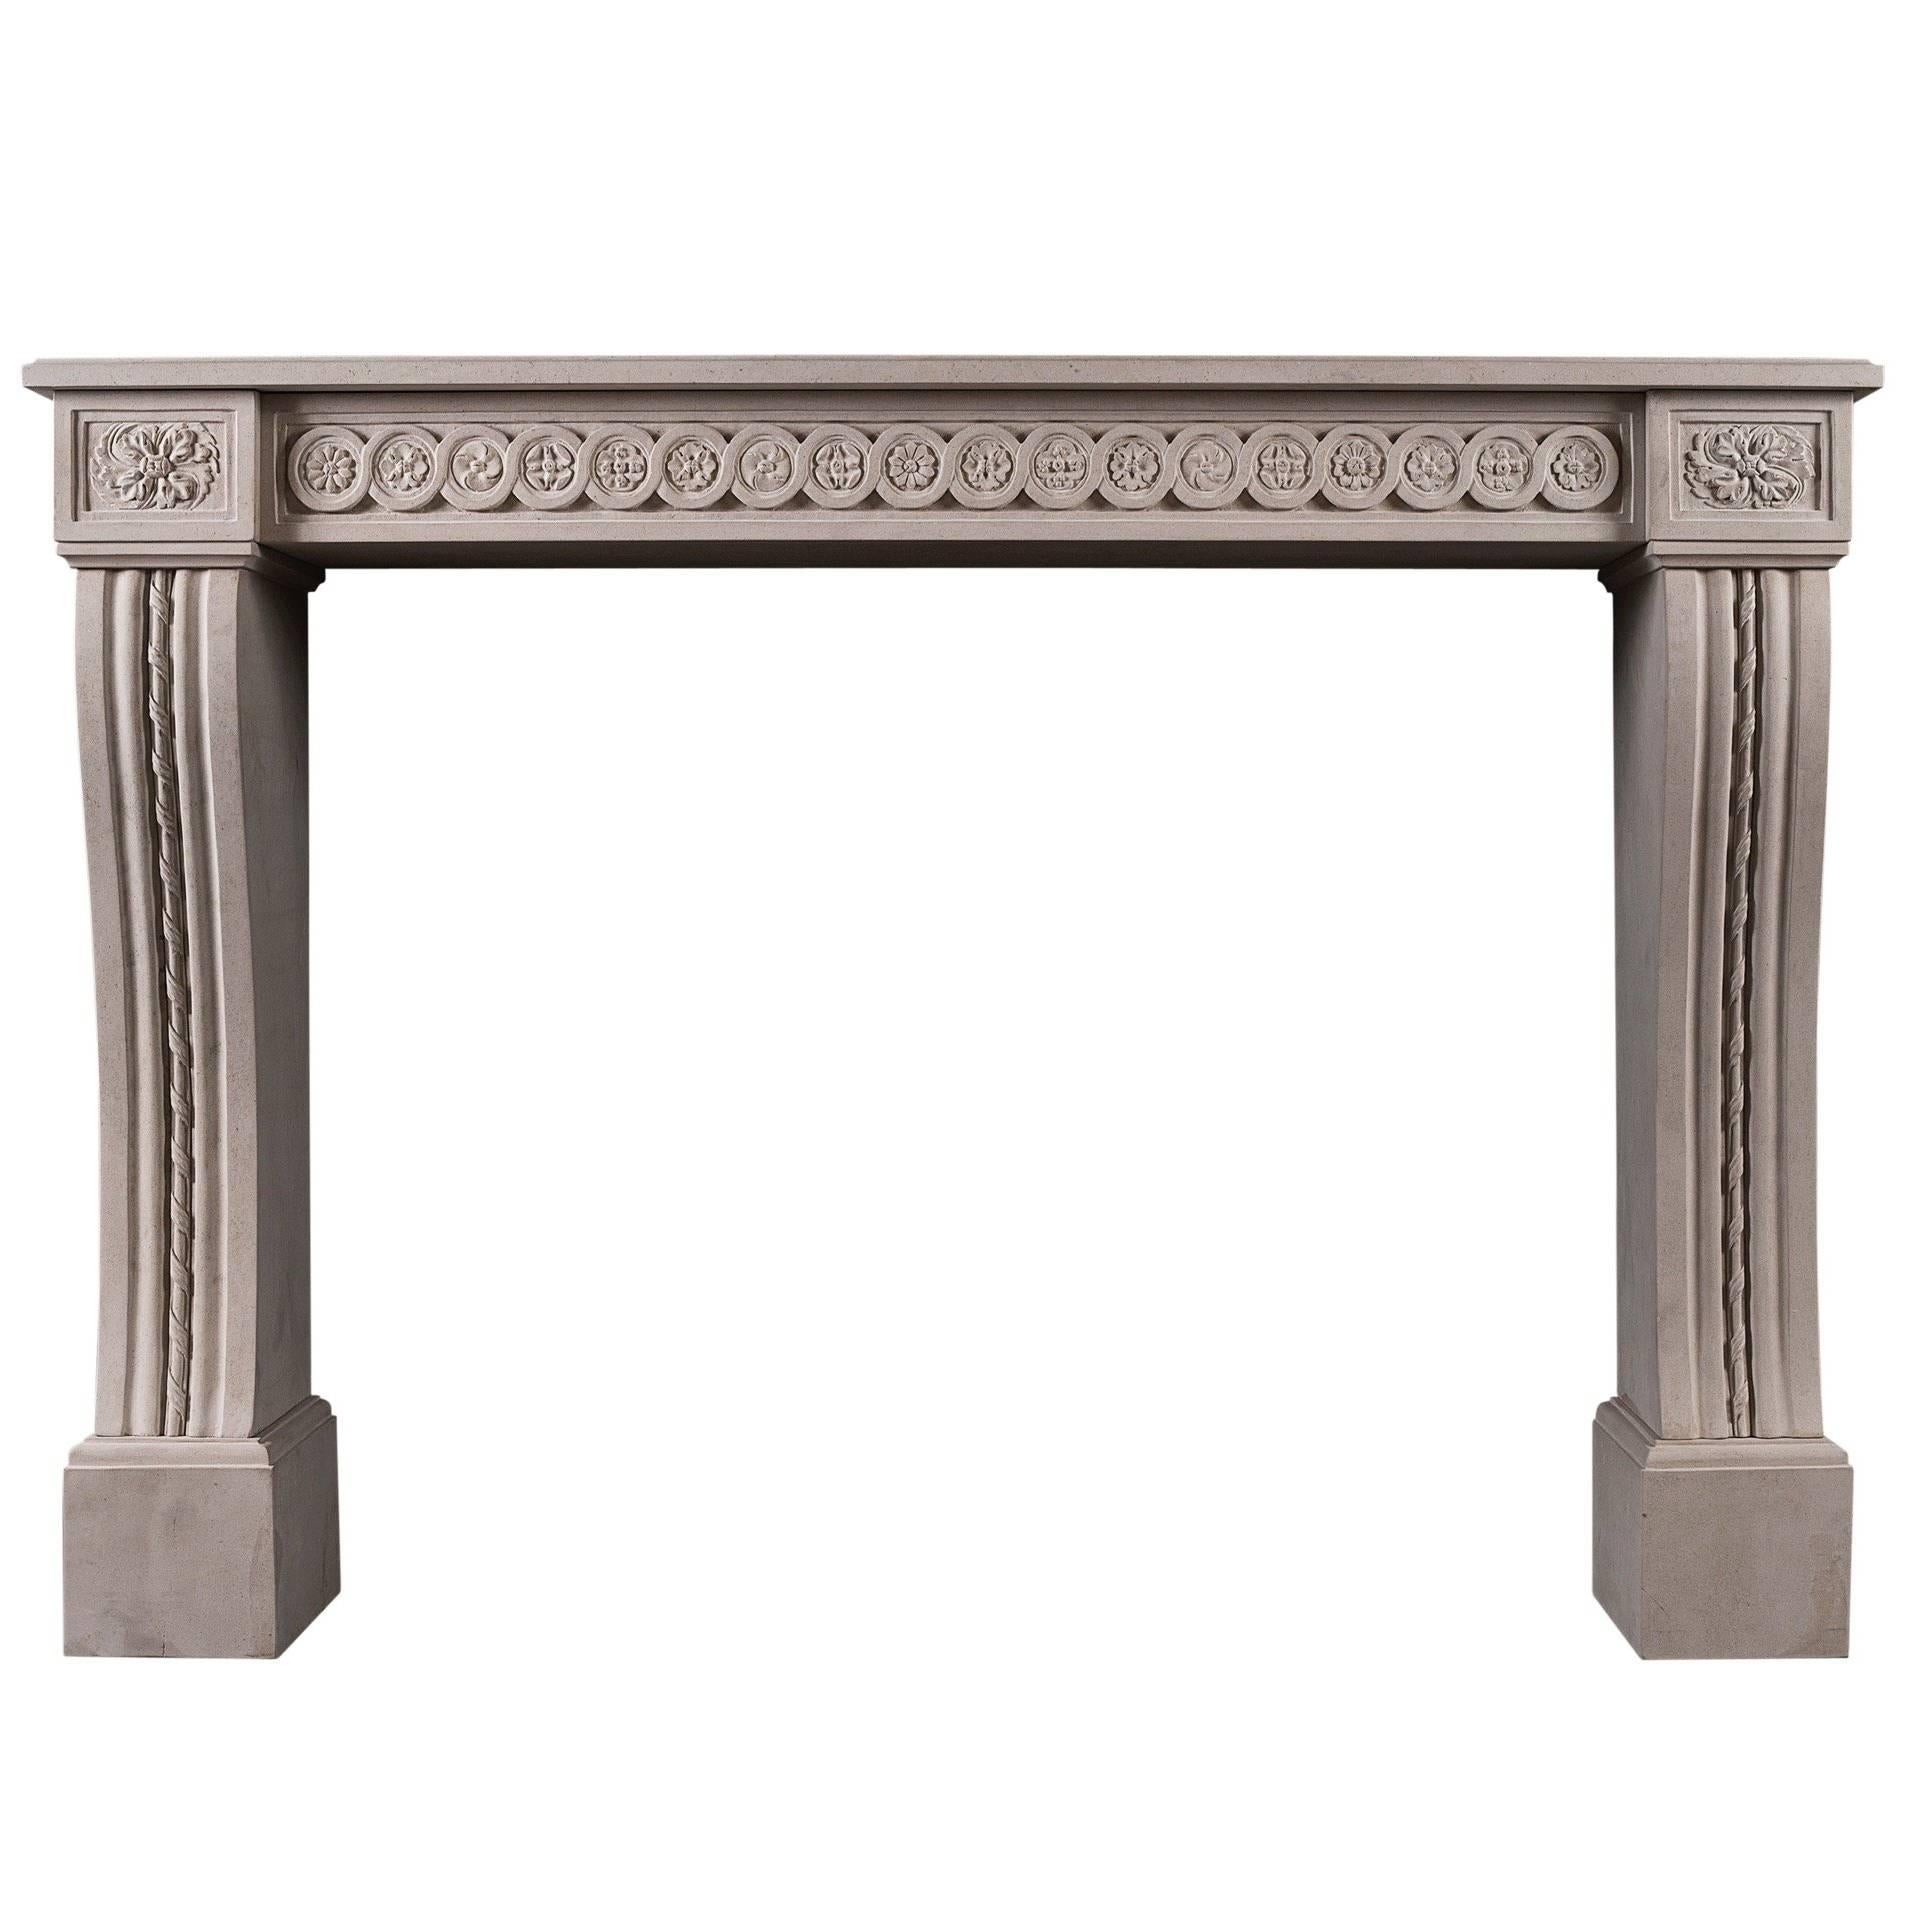 Carved Louis XVI Style Limestone Fireplace For Sale